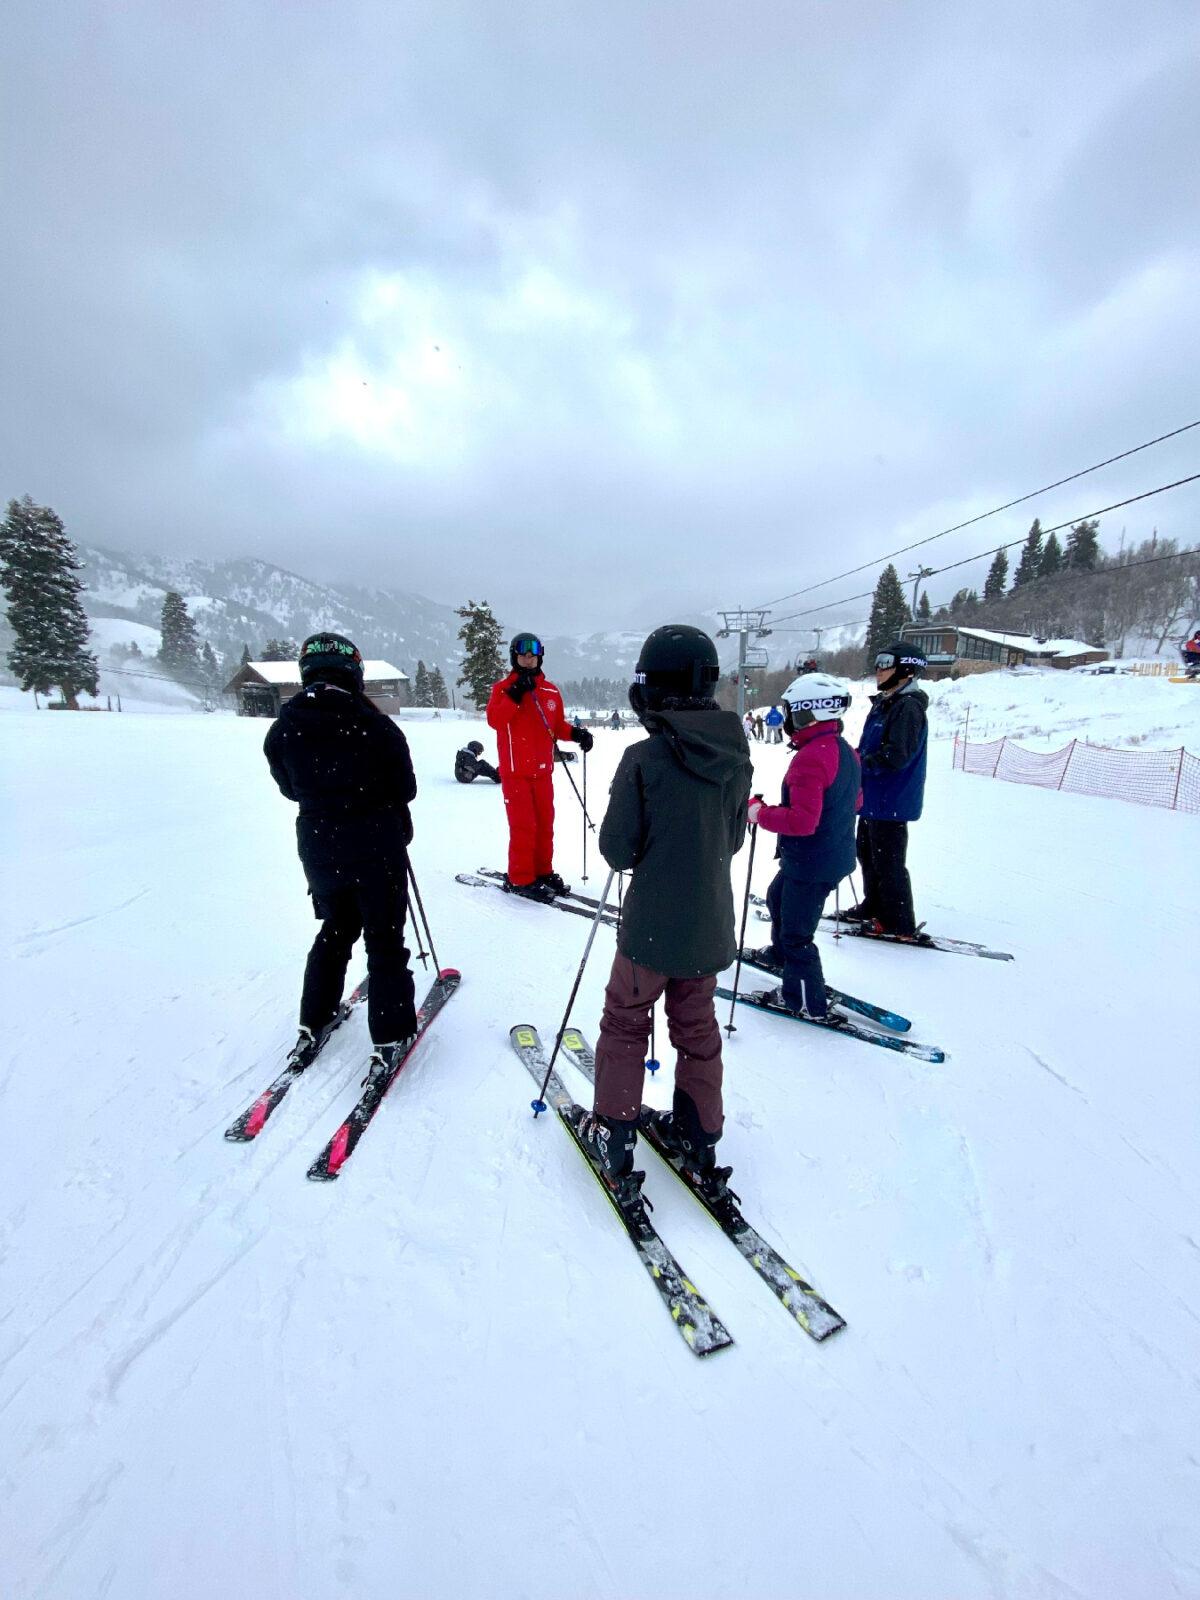 Skiers prepare for a lesson with Jay at the Snowbasin Resort in Ogden, Utah. (Margot Black)